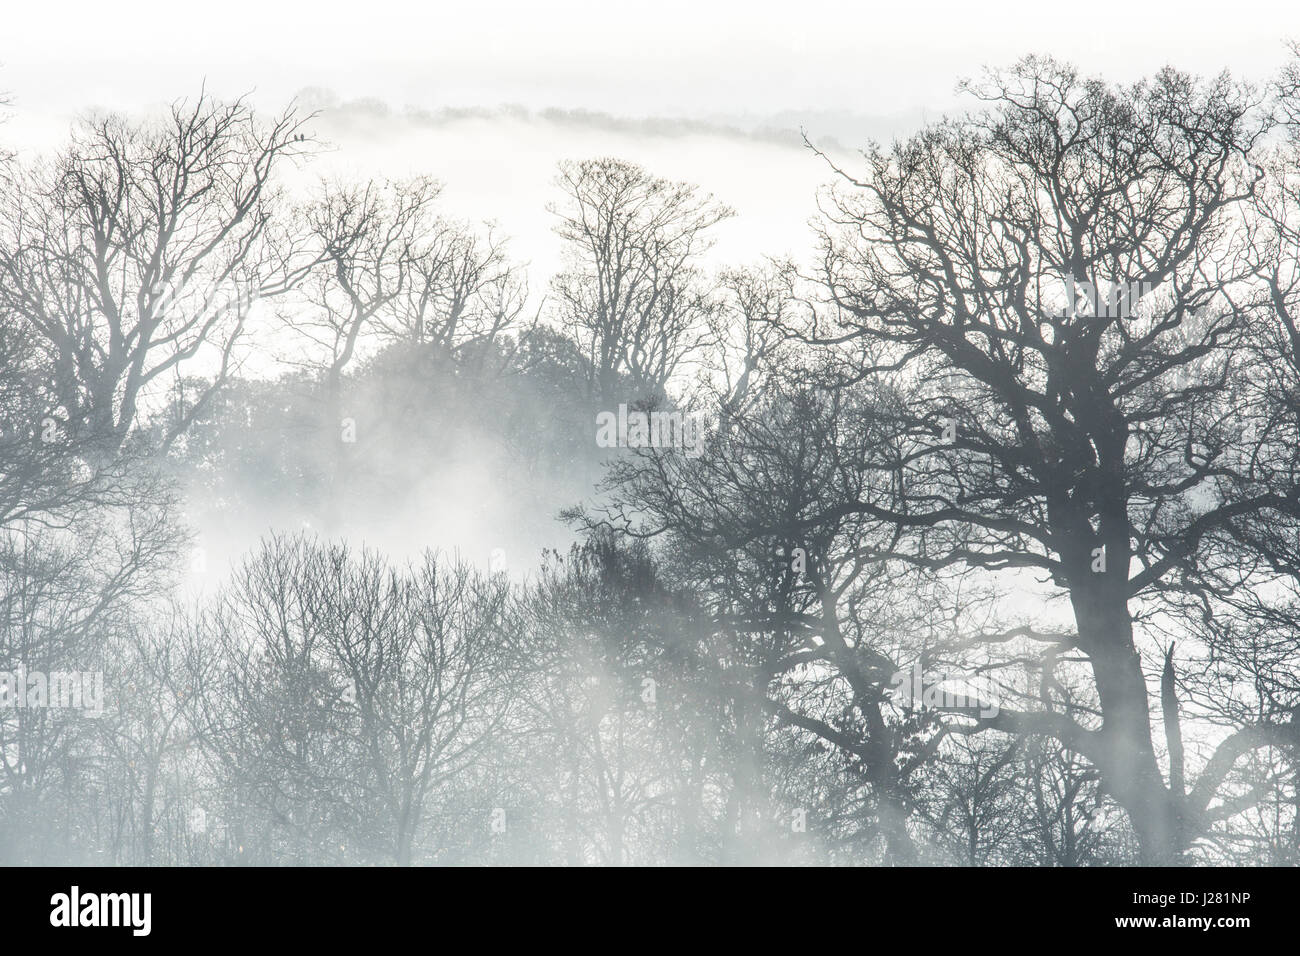 Branches of large trees silhouetted in morning low mist and fog. Sussex, UK. December. Stock Photo